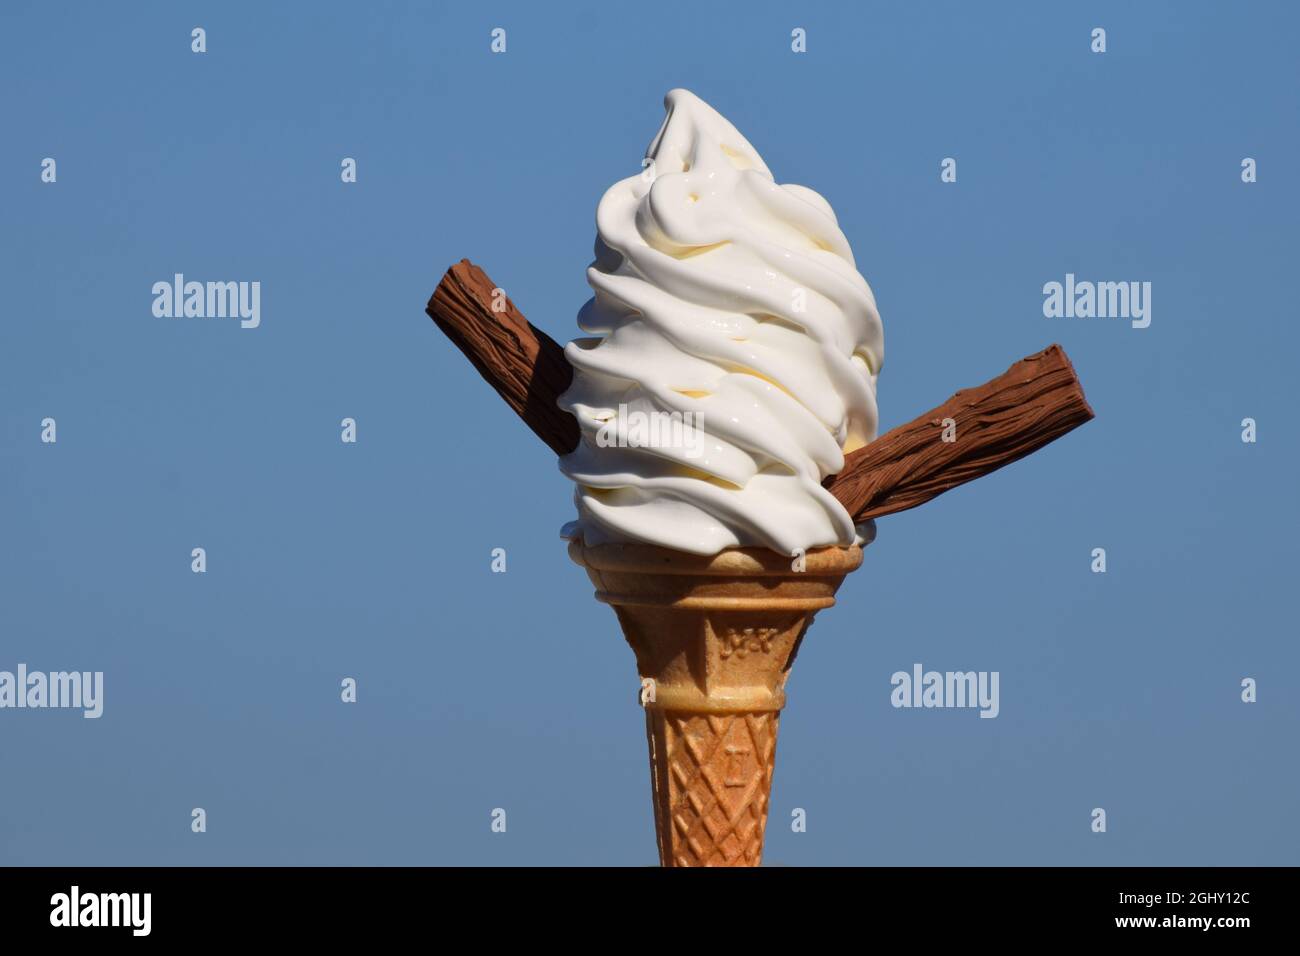 Soft whipped vanilla ice cream in a cone with chocolate flakes. Flake 99. My Whippy. UK. Stock Photo